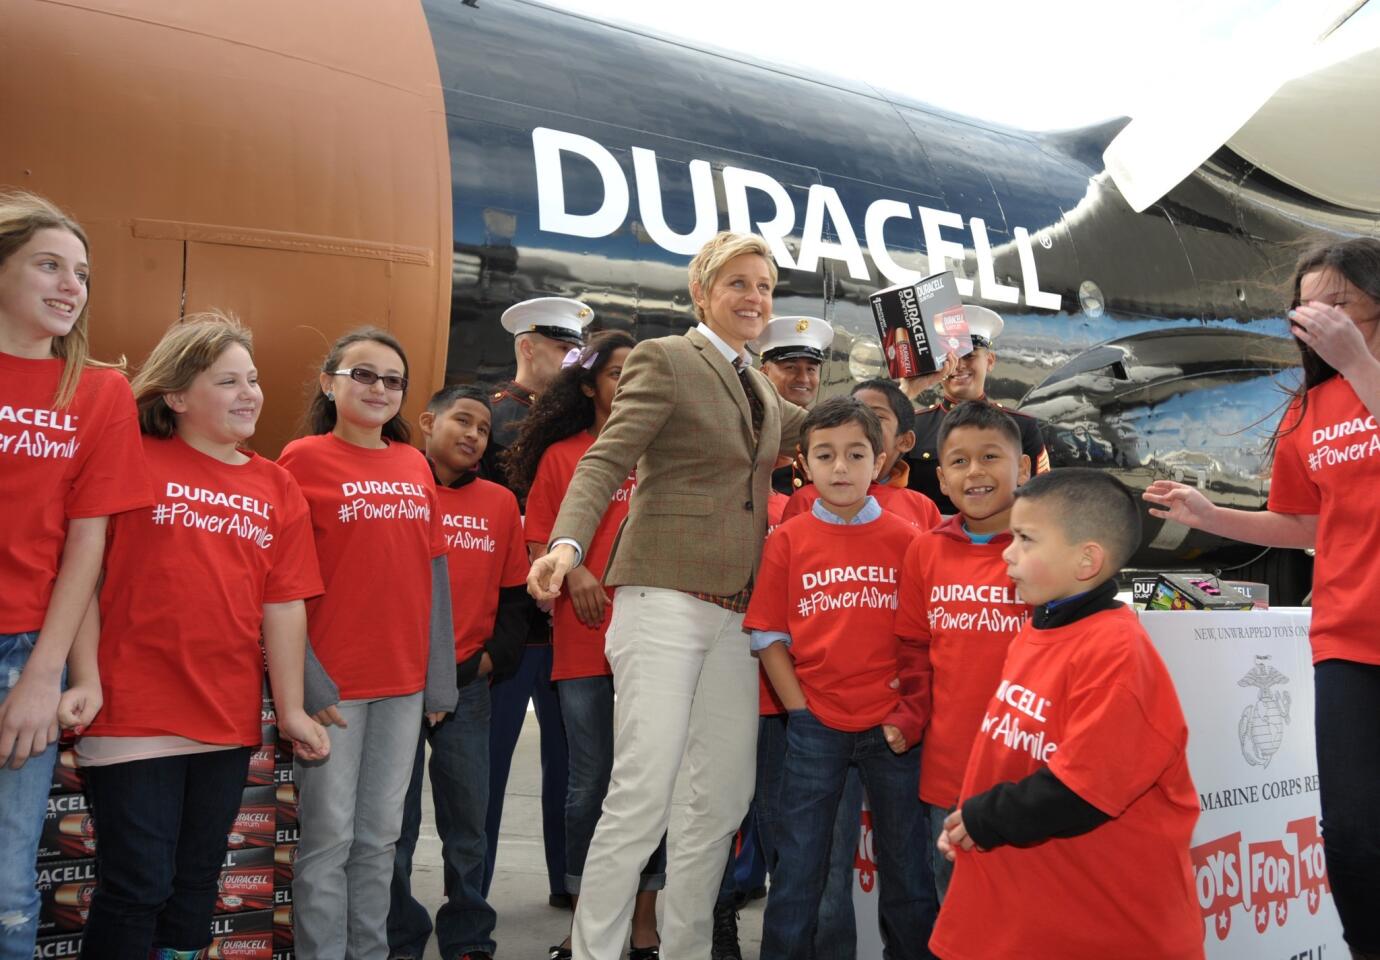 Ellen DeGeneres partners with Duracell to power up Christmas for the needy